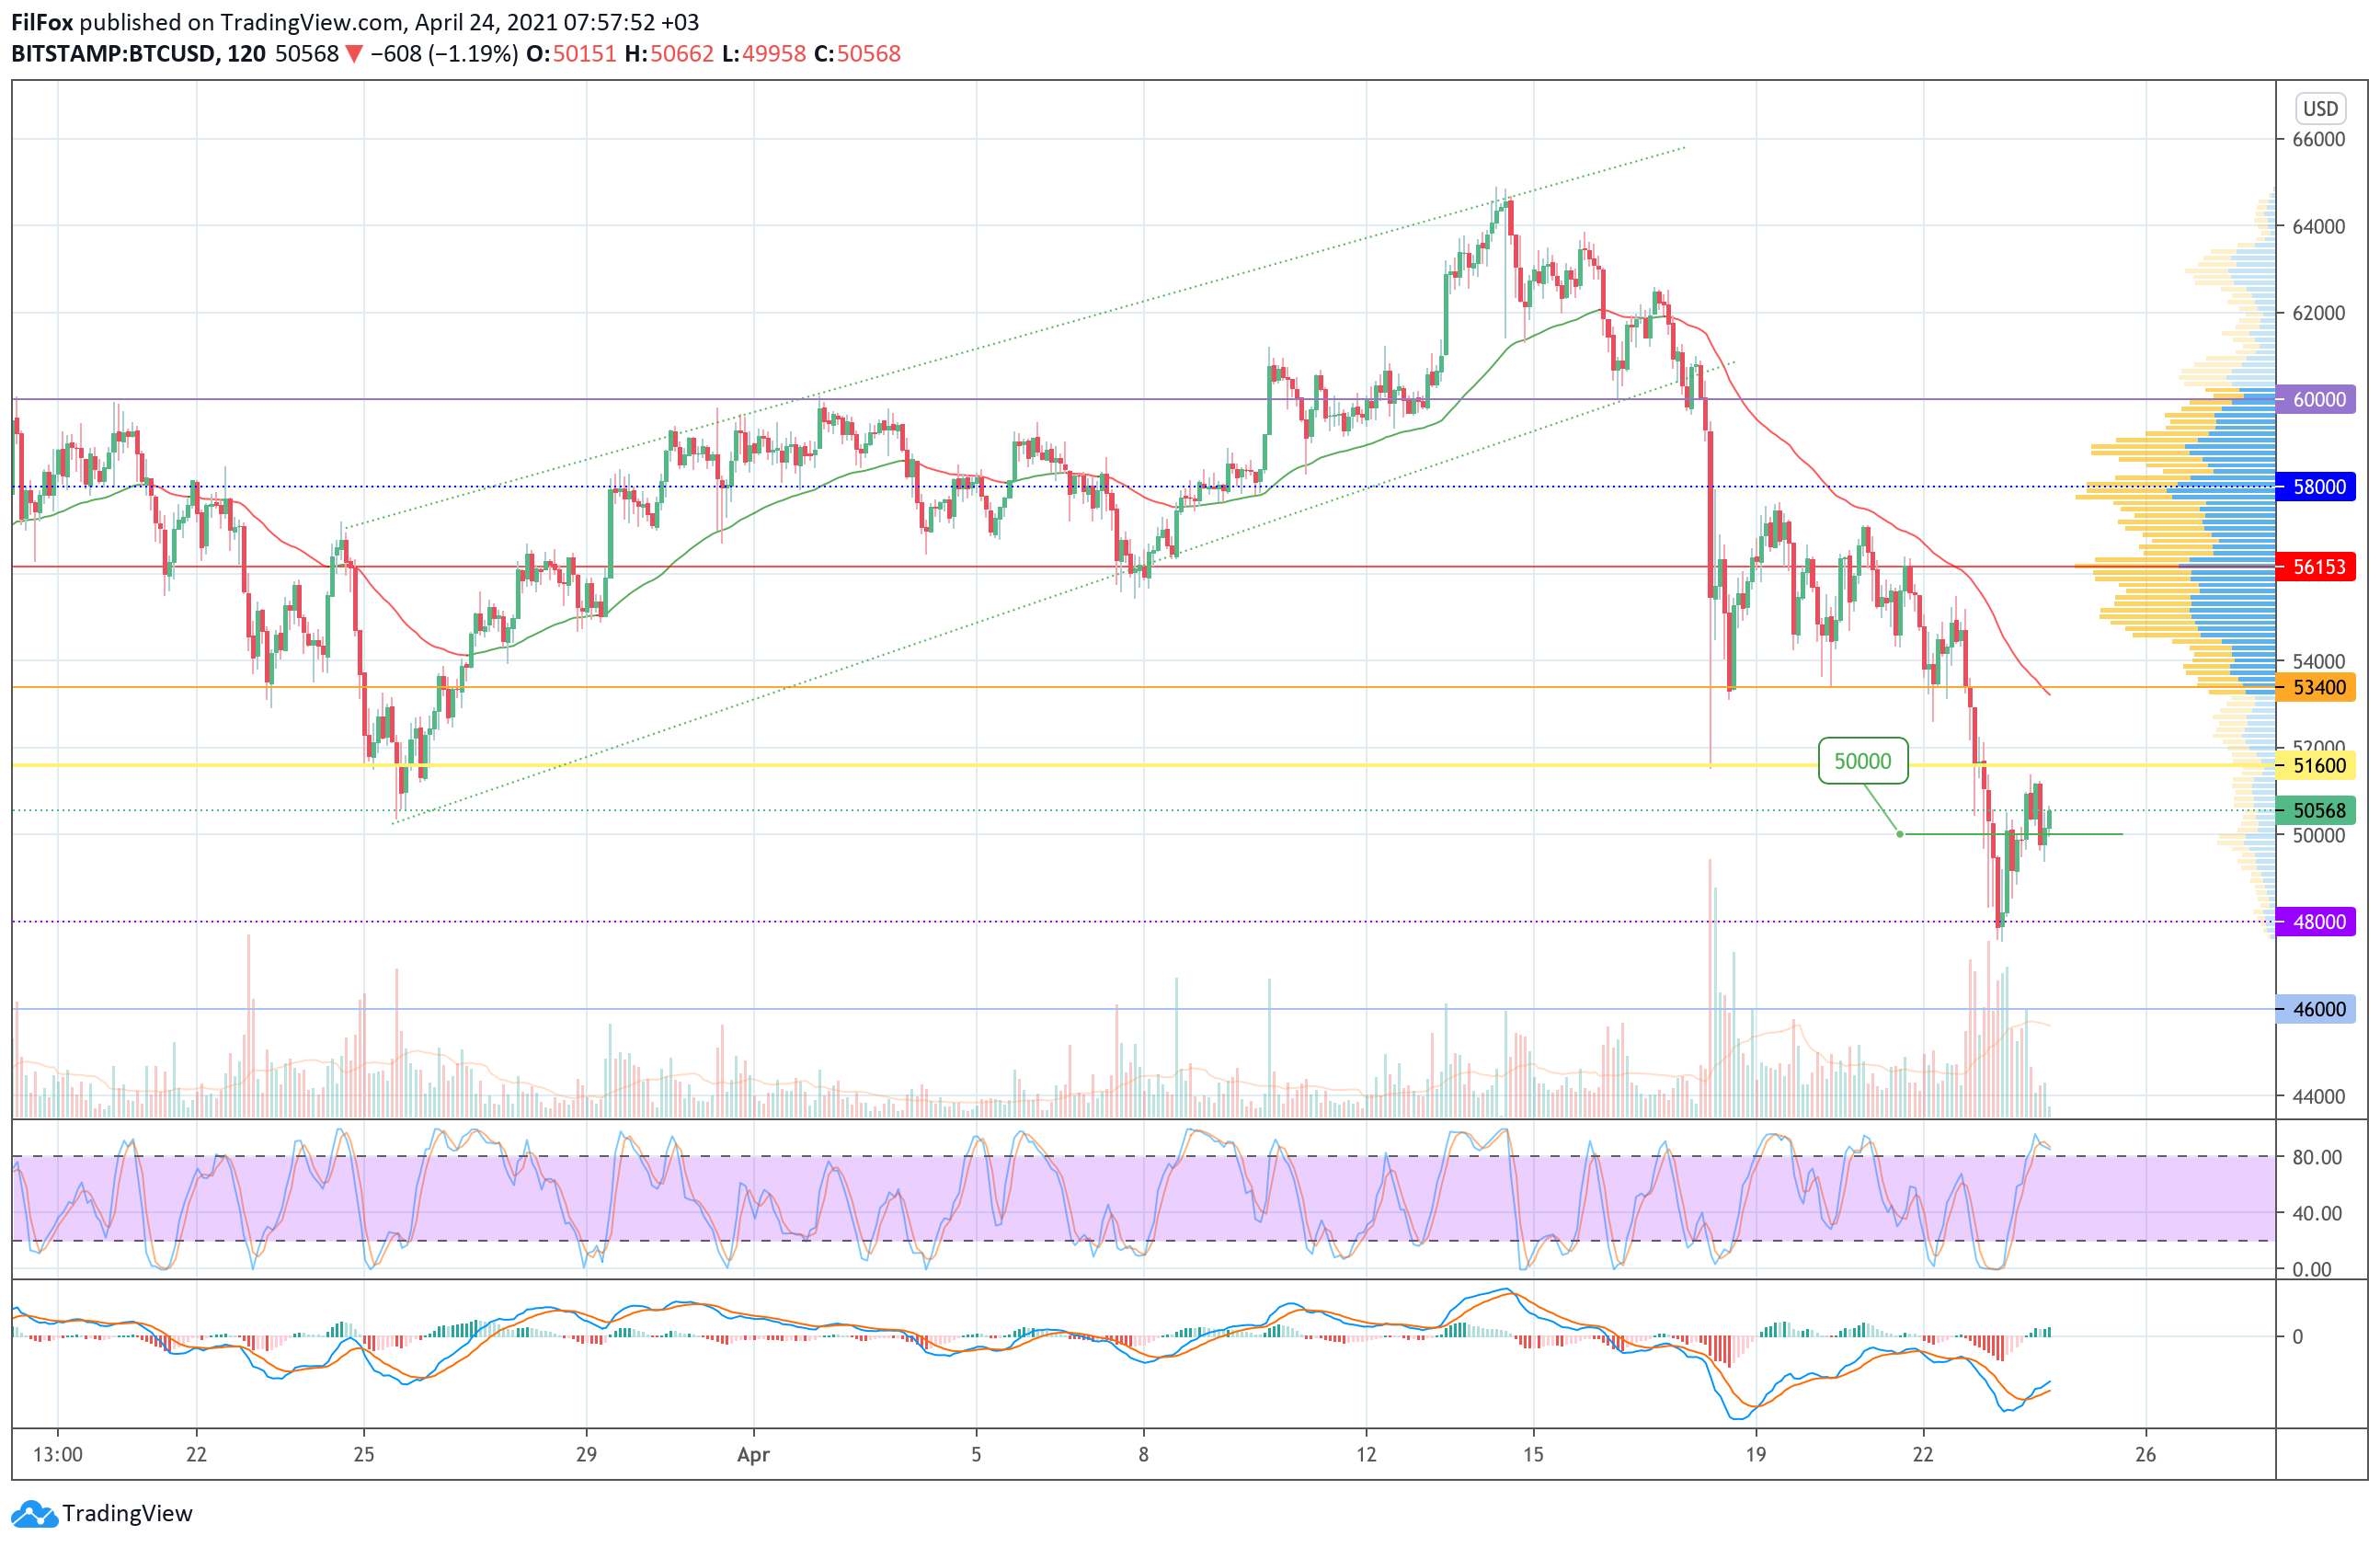 Analysis of the prices of Bitcoin, Ethereum, XRP for 04/24/2021